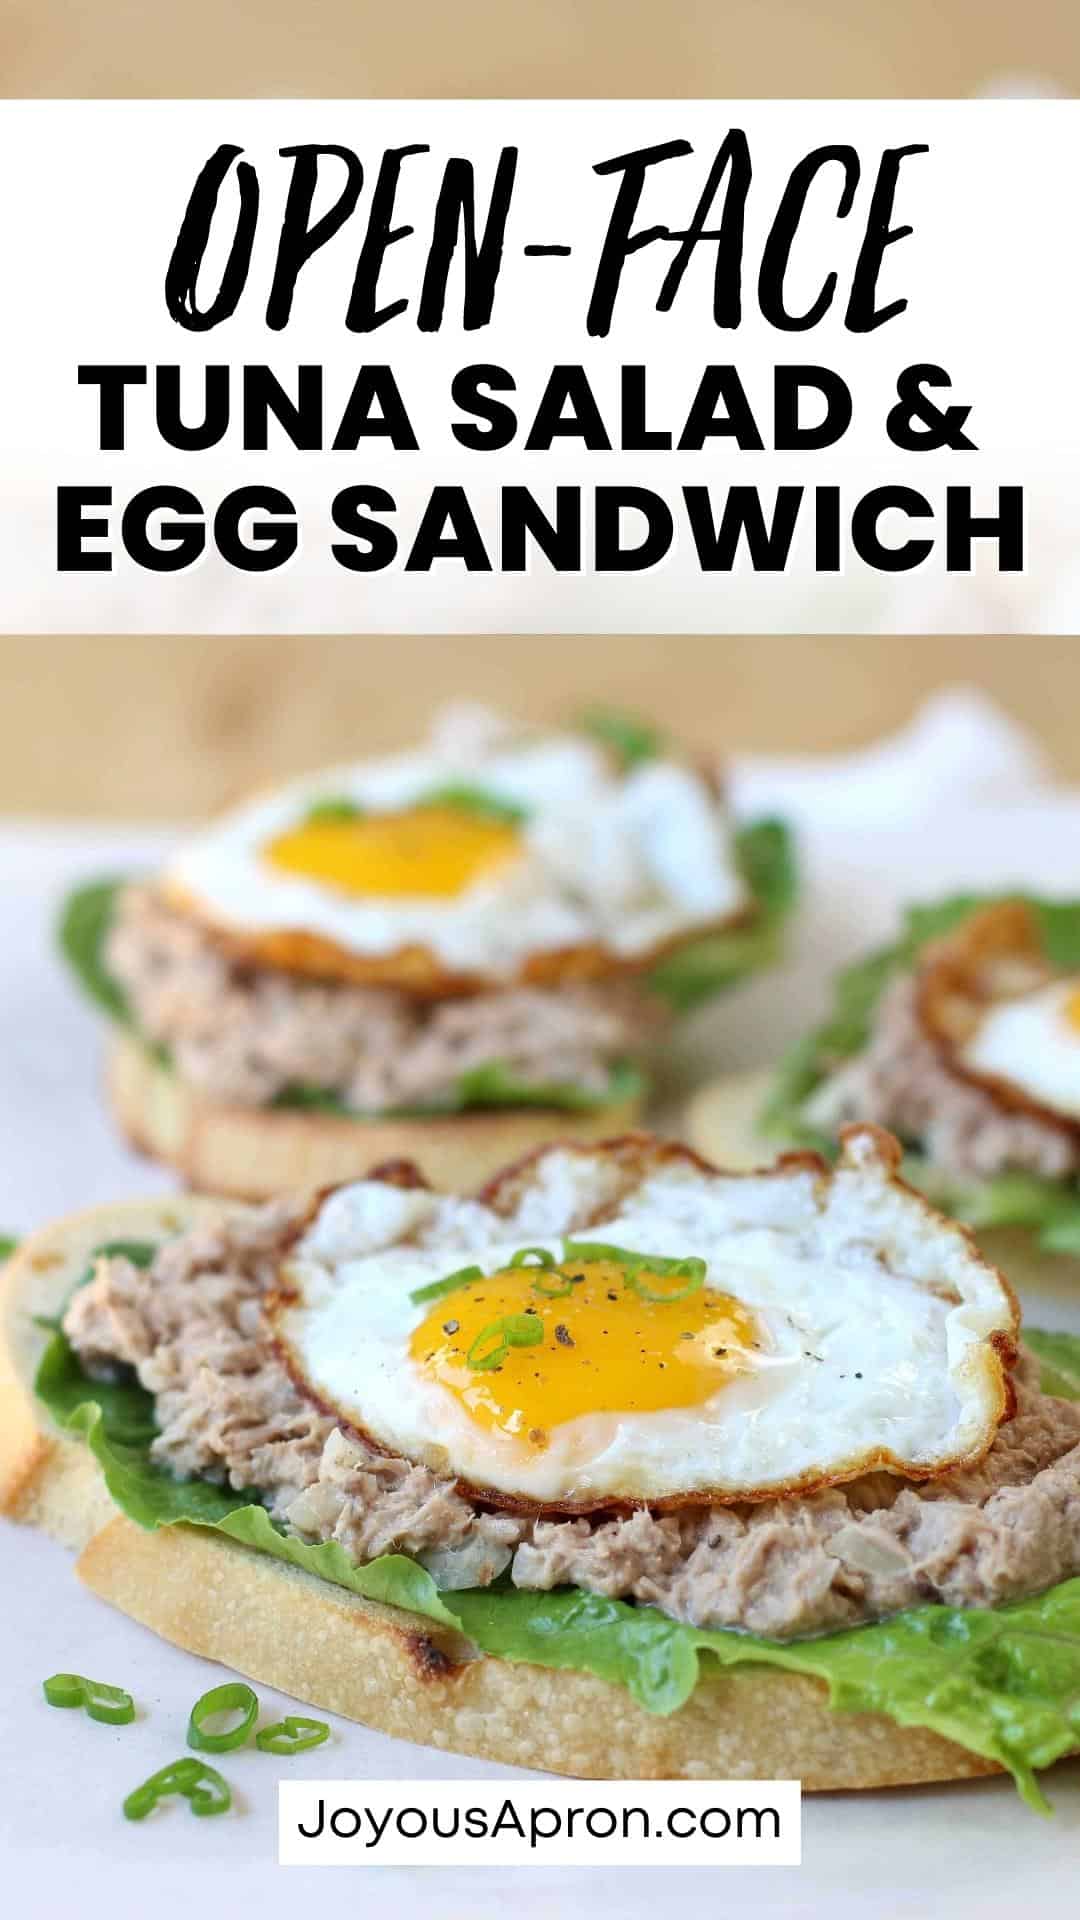 Open Face Tuna Salad and Fried Egg Sandwich - The perfect easy and quick lunch! Sourdough bread topped with lettuce, tuna salad and a fried egg. via @joyousapron